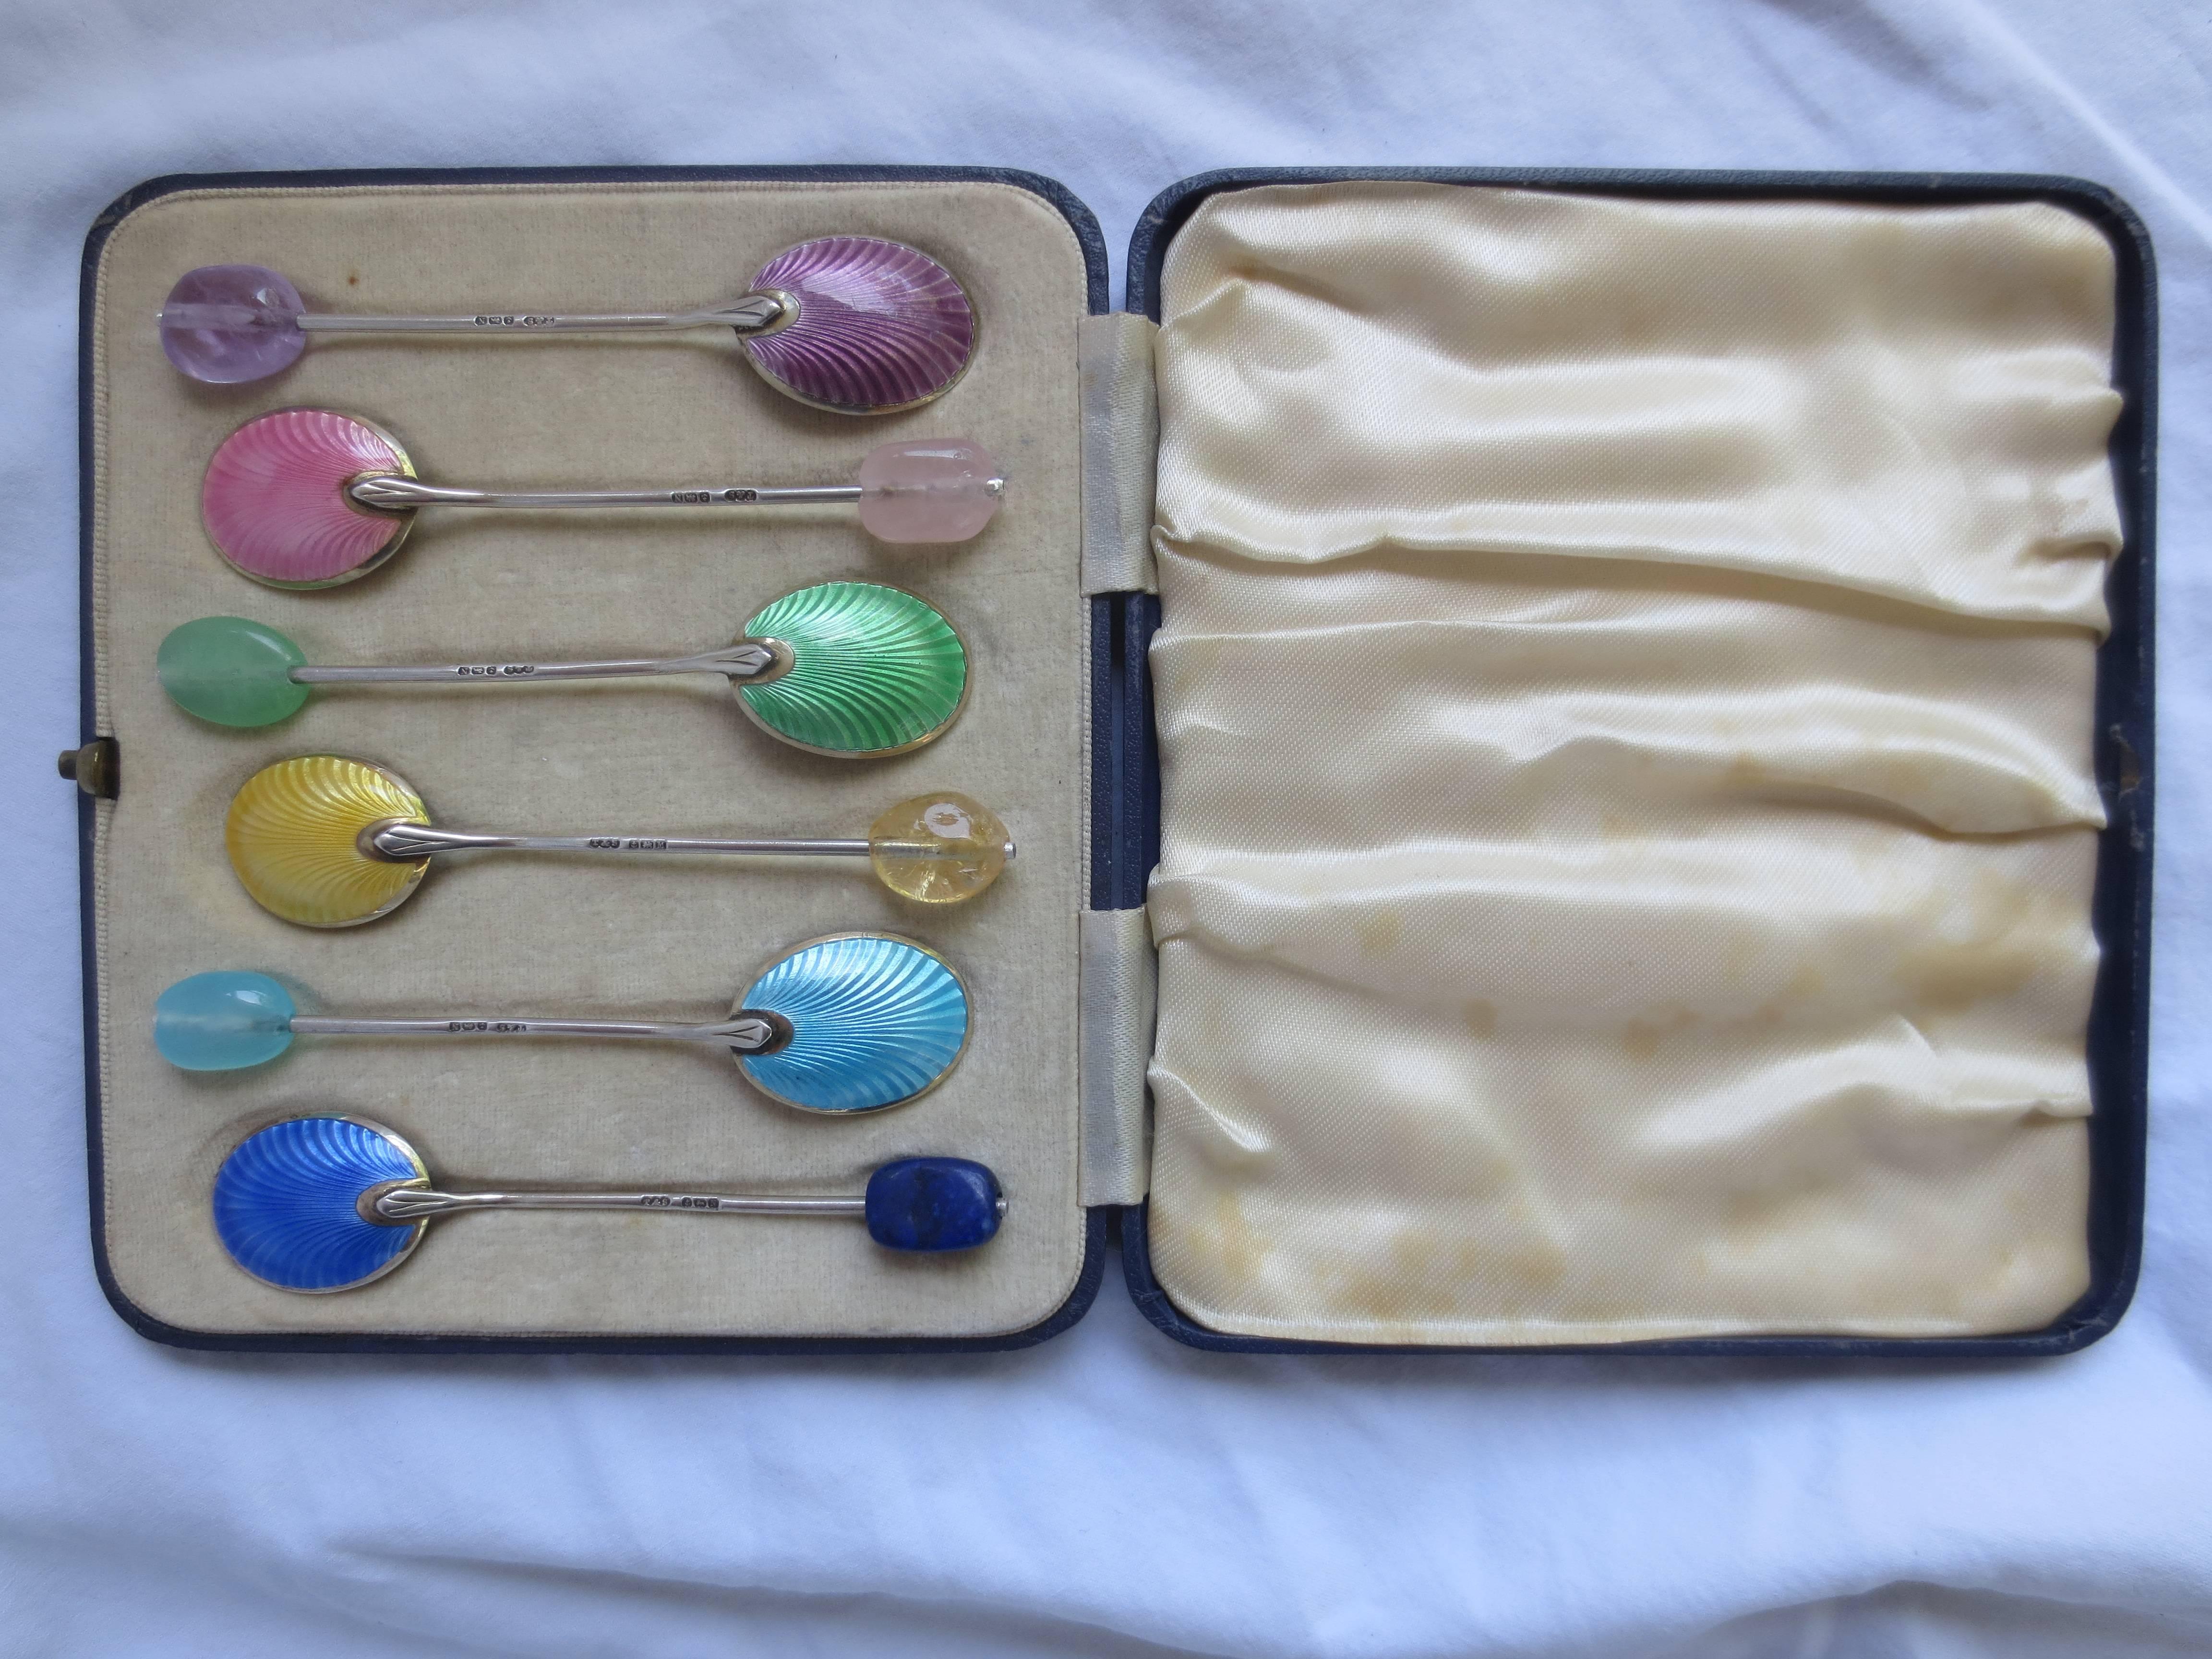 Vintage sterling silver-spoon set in original box. Stamped Turner and Simpson (T&S). The spoons have been refitted with semi-precious stones to match the beautiful enameling on the spoon underside. The stones are Green Topaz, Amethyst, Citrine, Blue